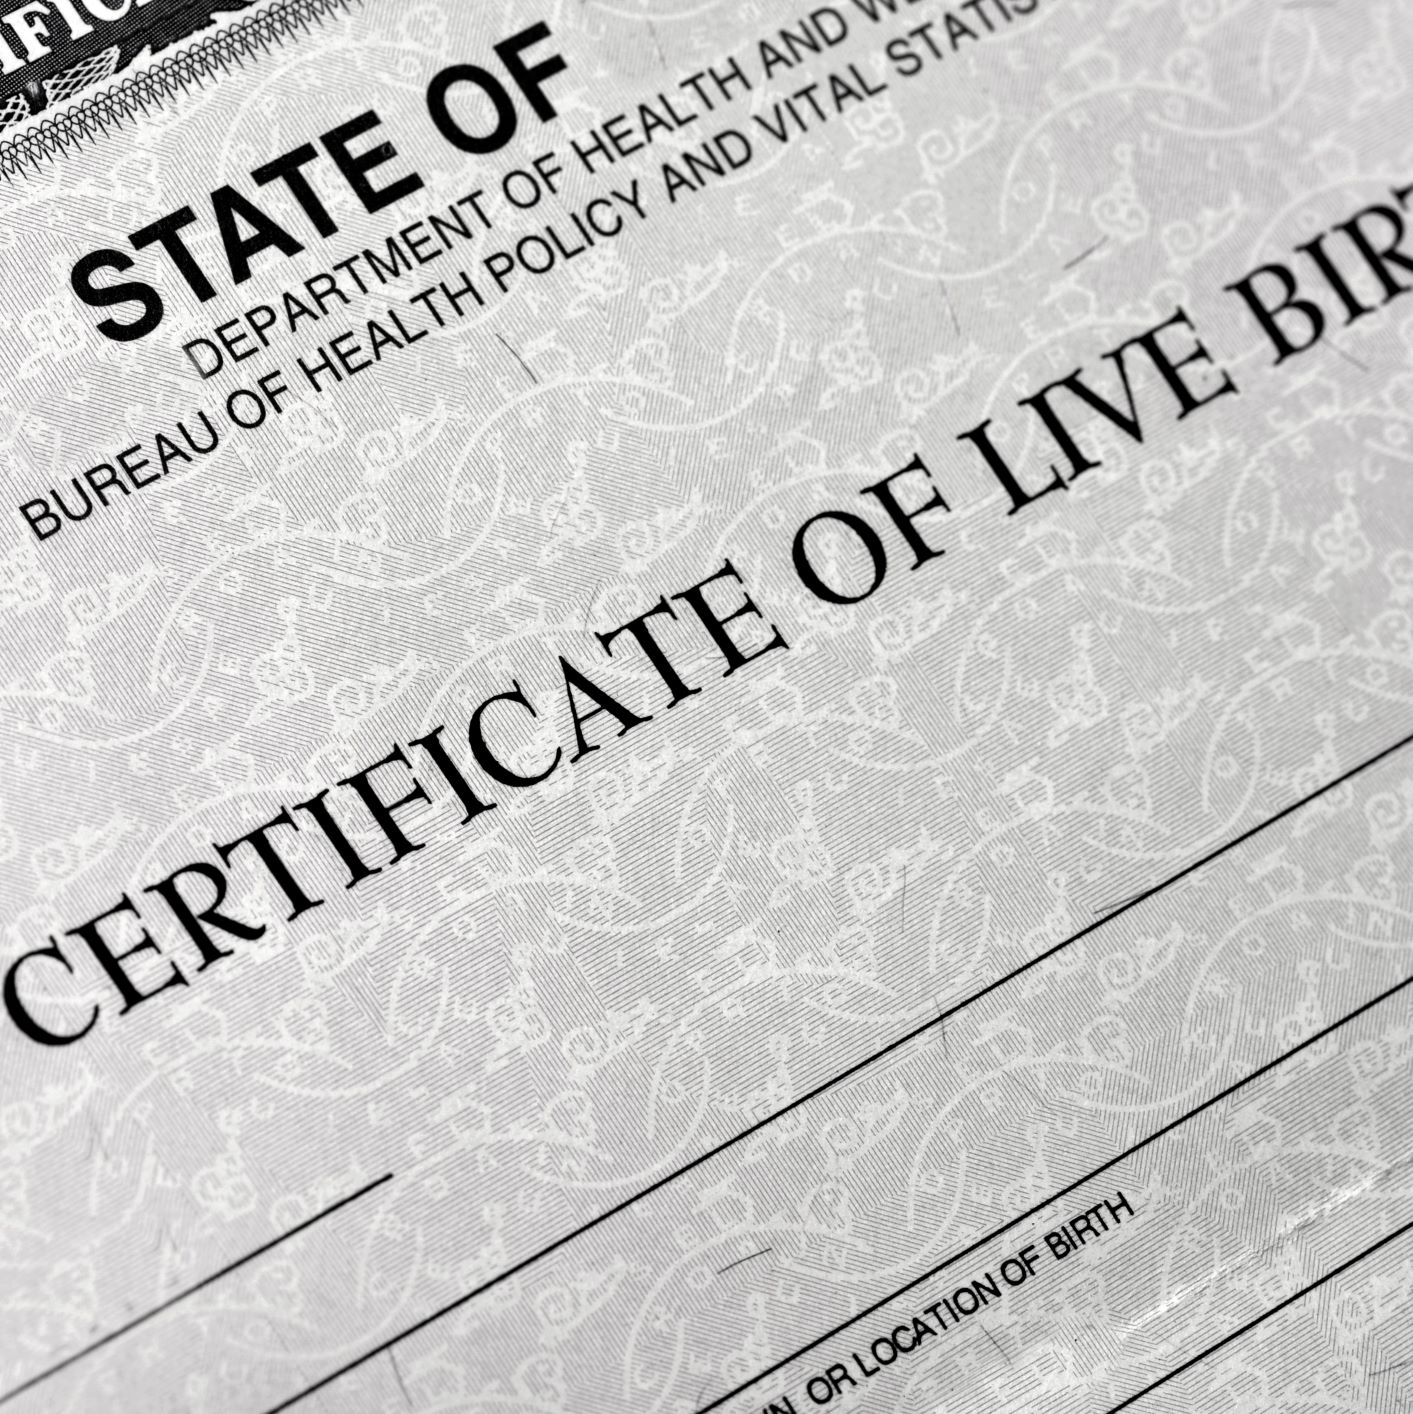 How to change the name of the child on birth certificate